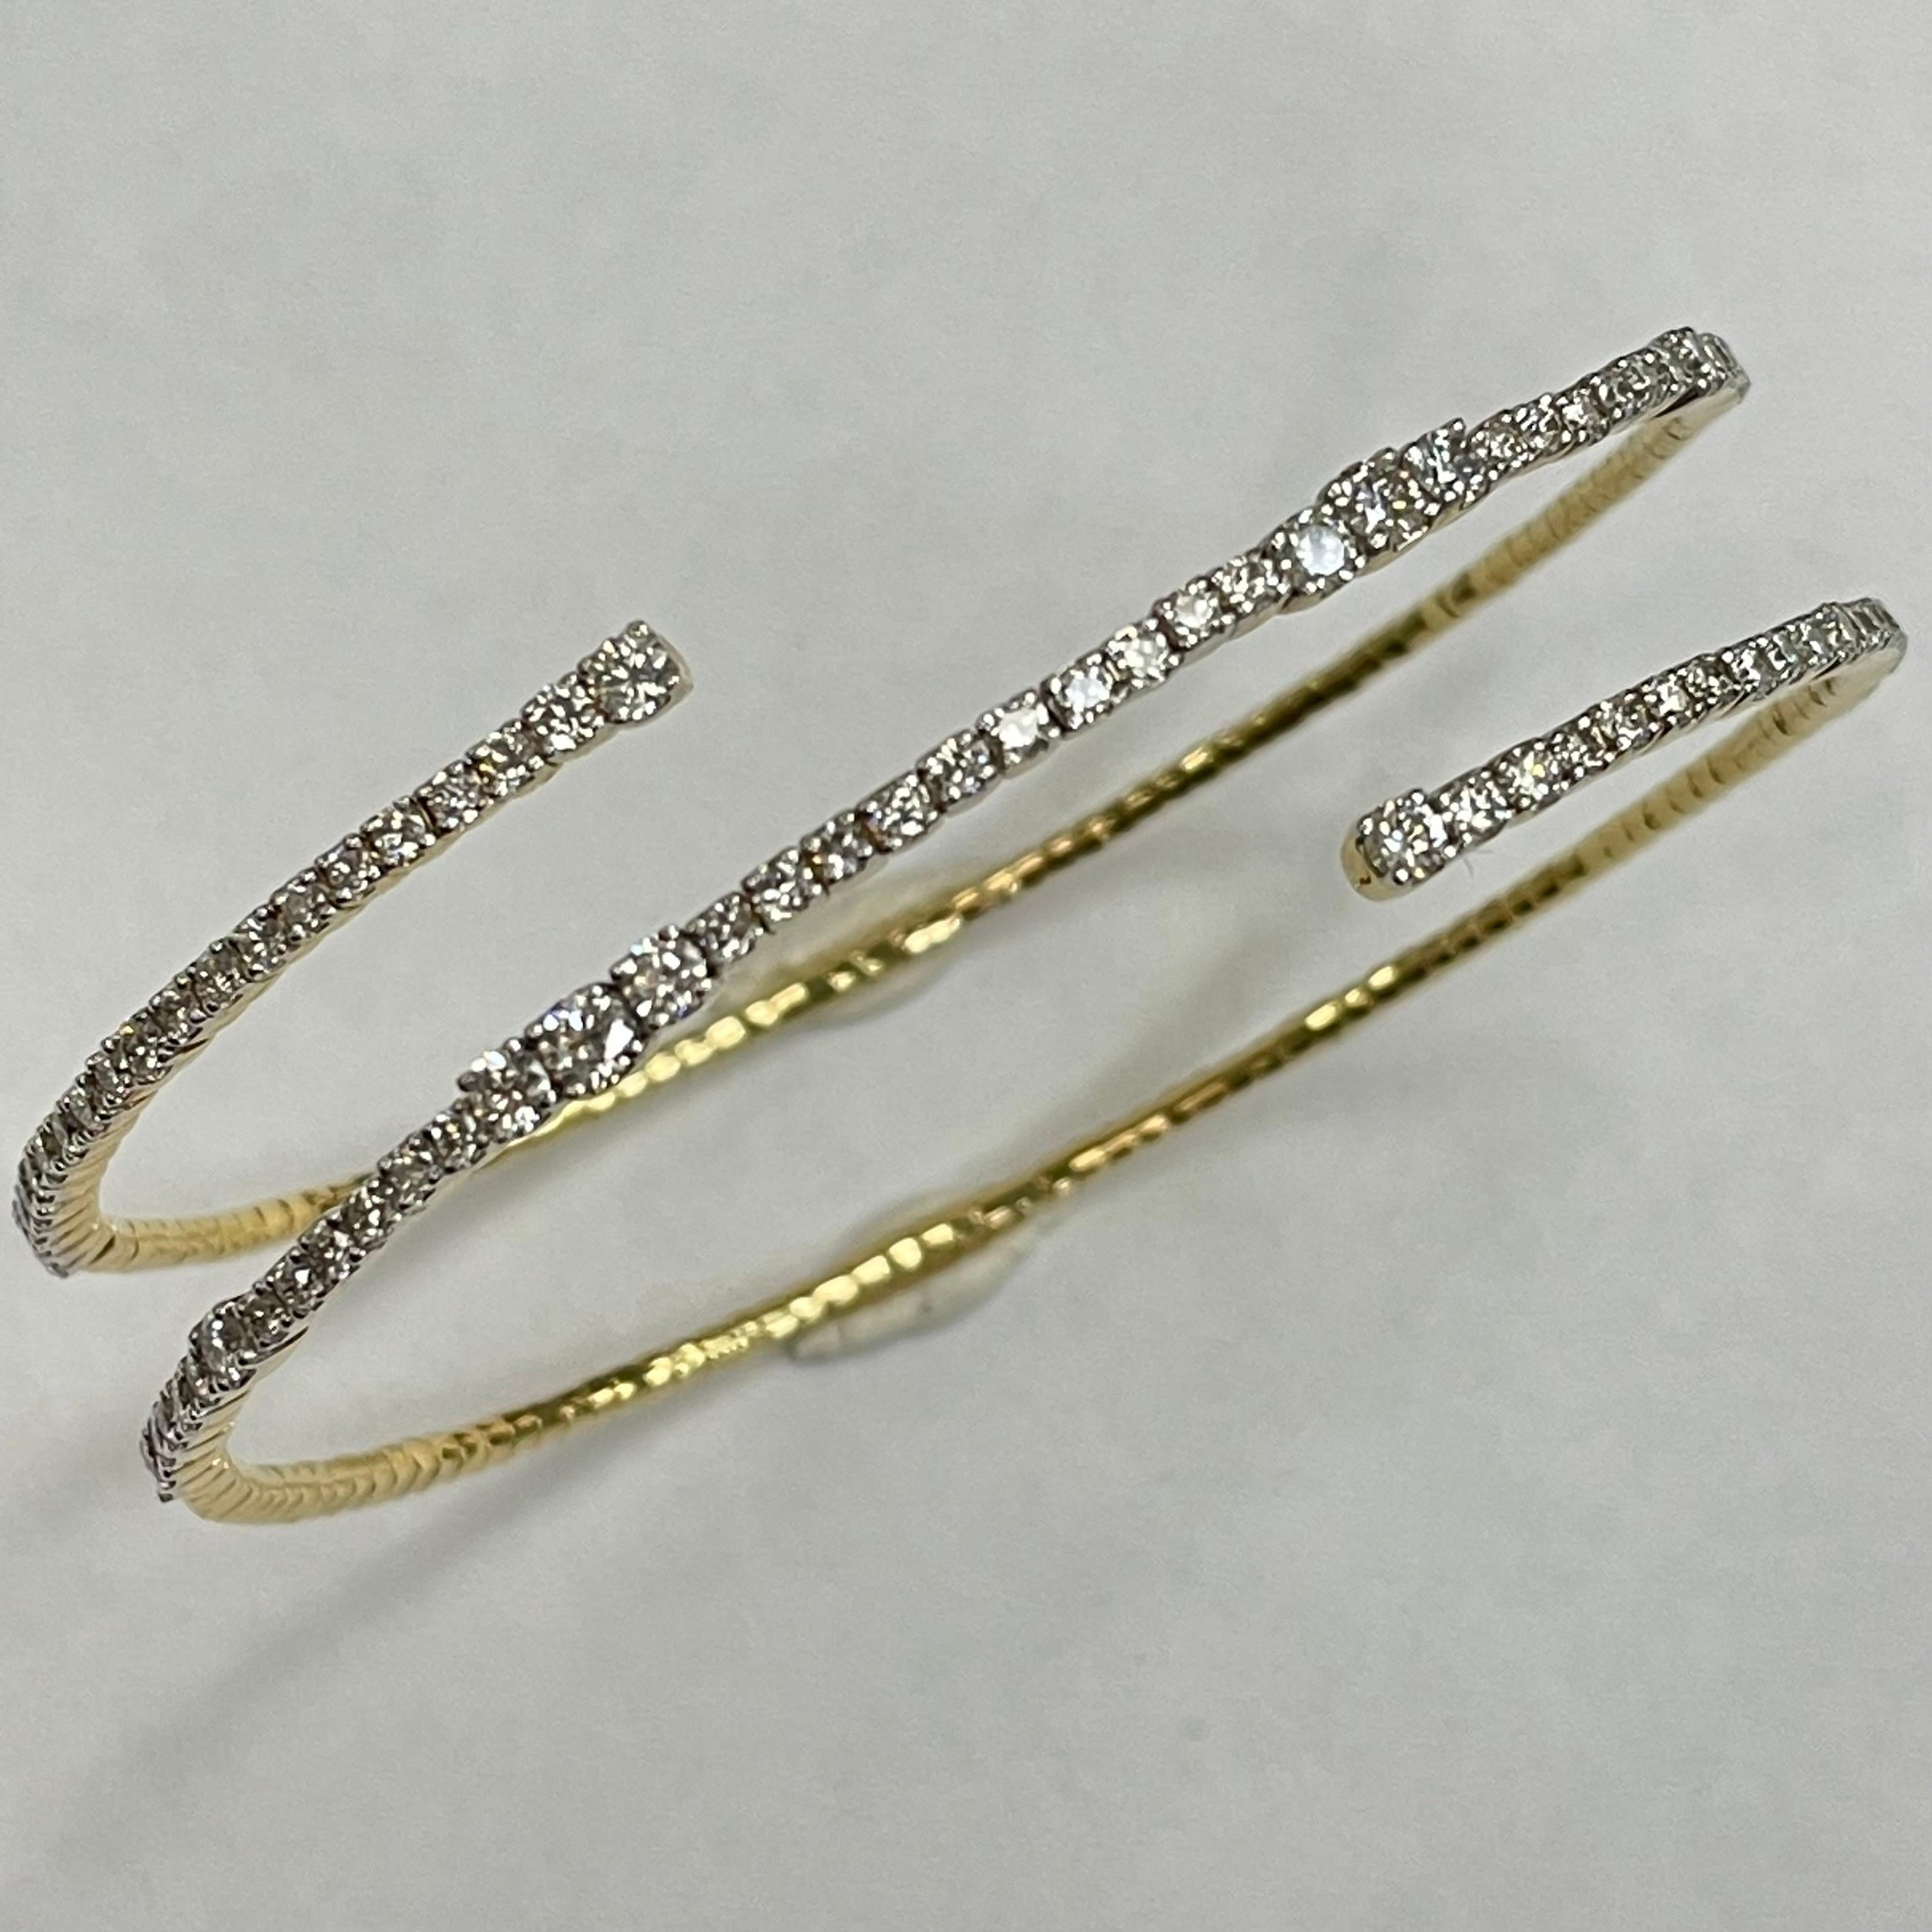 This 18K yellow gold wrap diamond open bangle bracelet set with 84 pieces brillant - cut diamonds, weighing 2.09 carats. This bangle is perfectly suited for occasions when you feel elegant, sleek, and graceful.